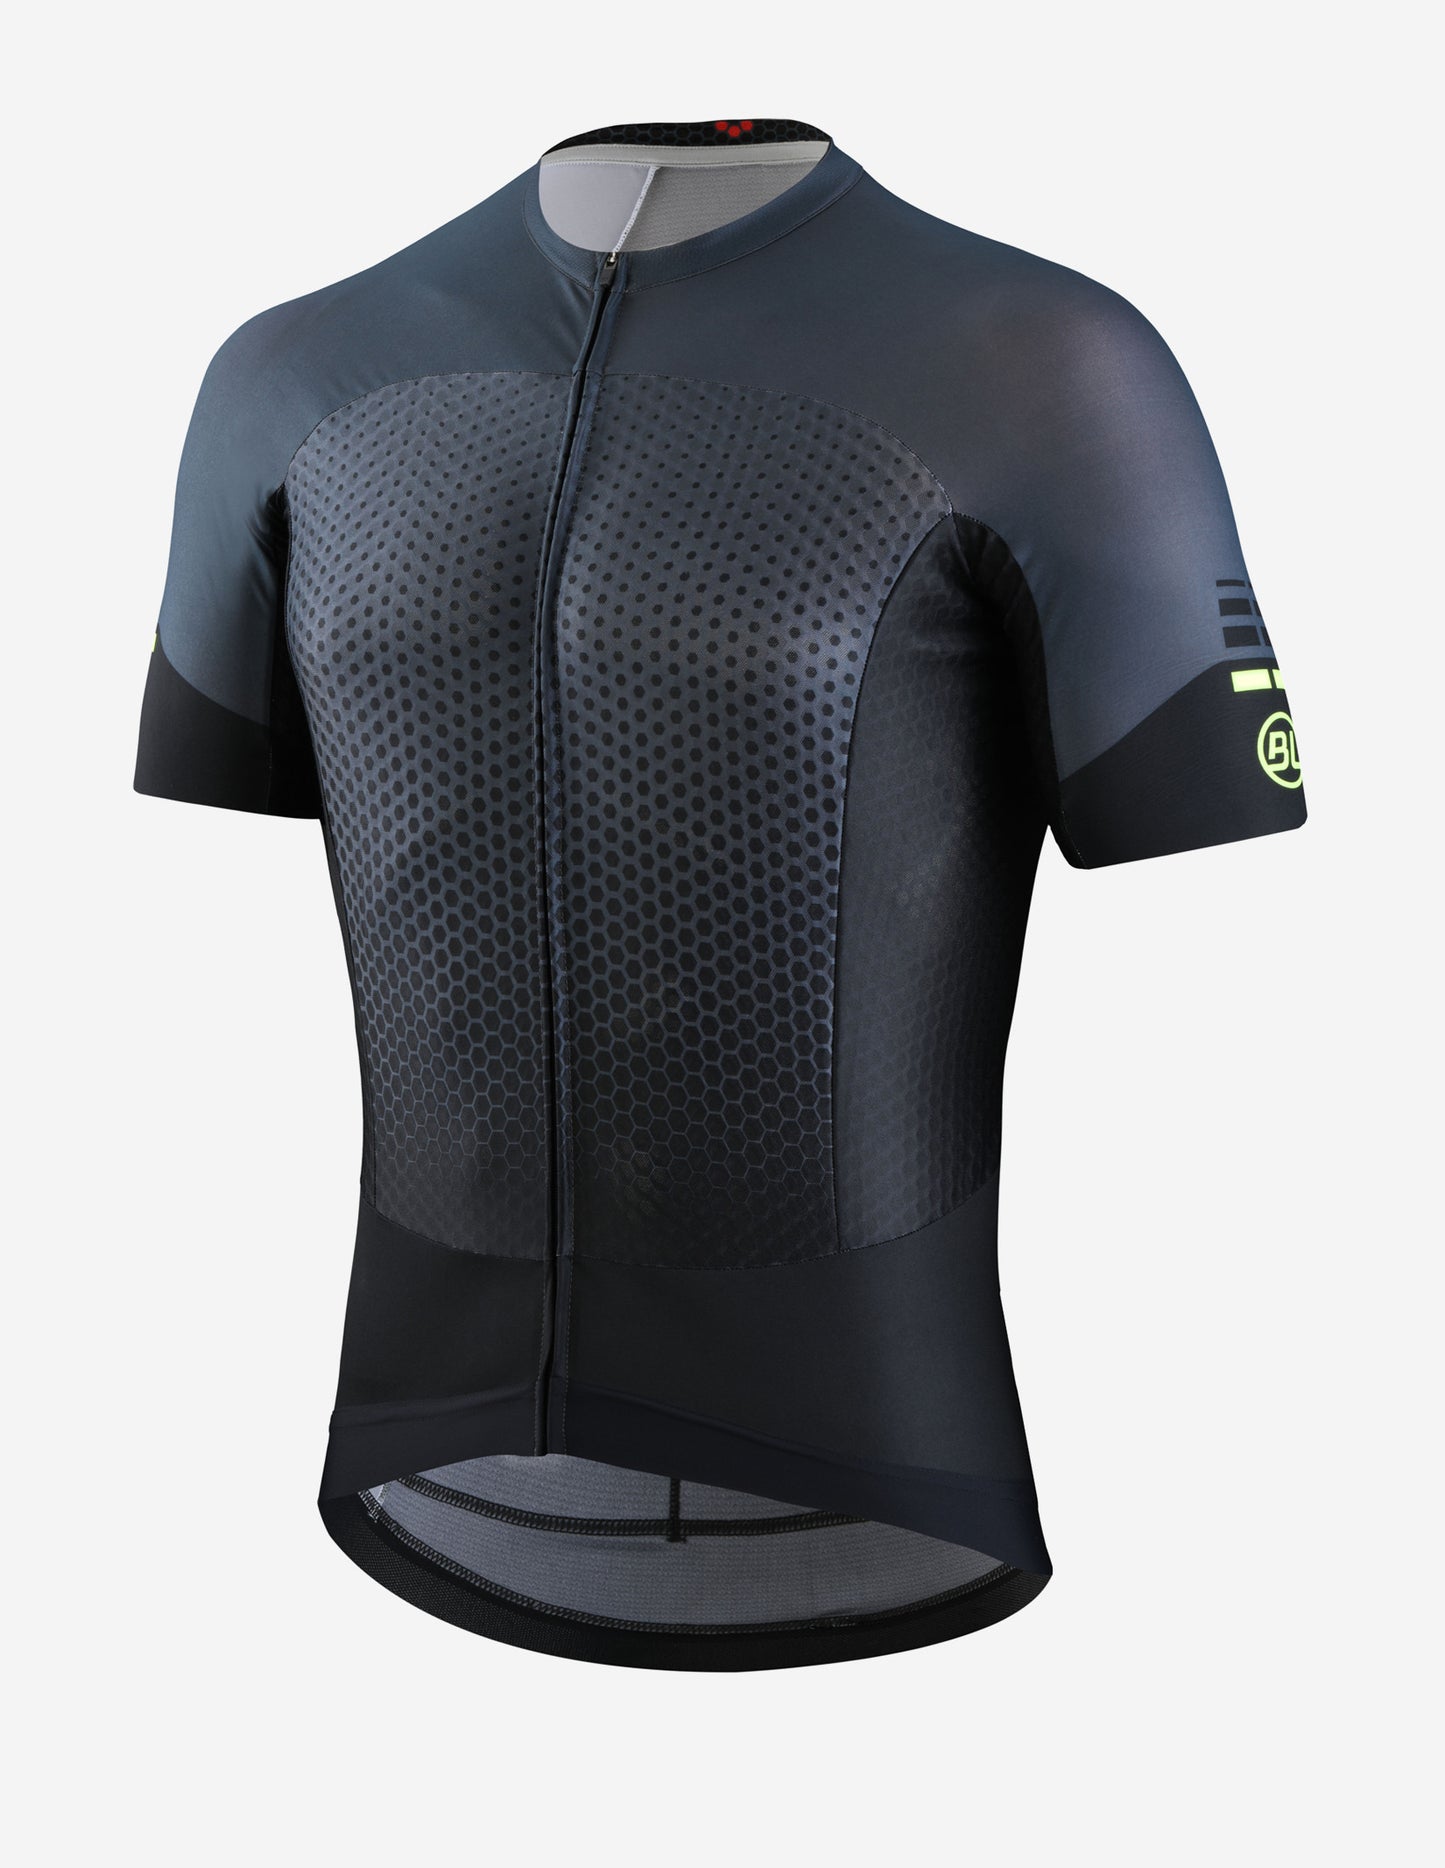 Pro-S Men's Cycling Jersey